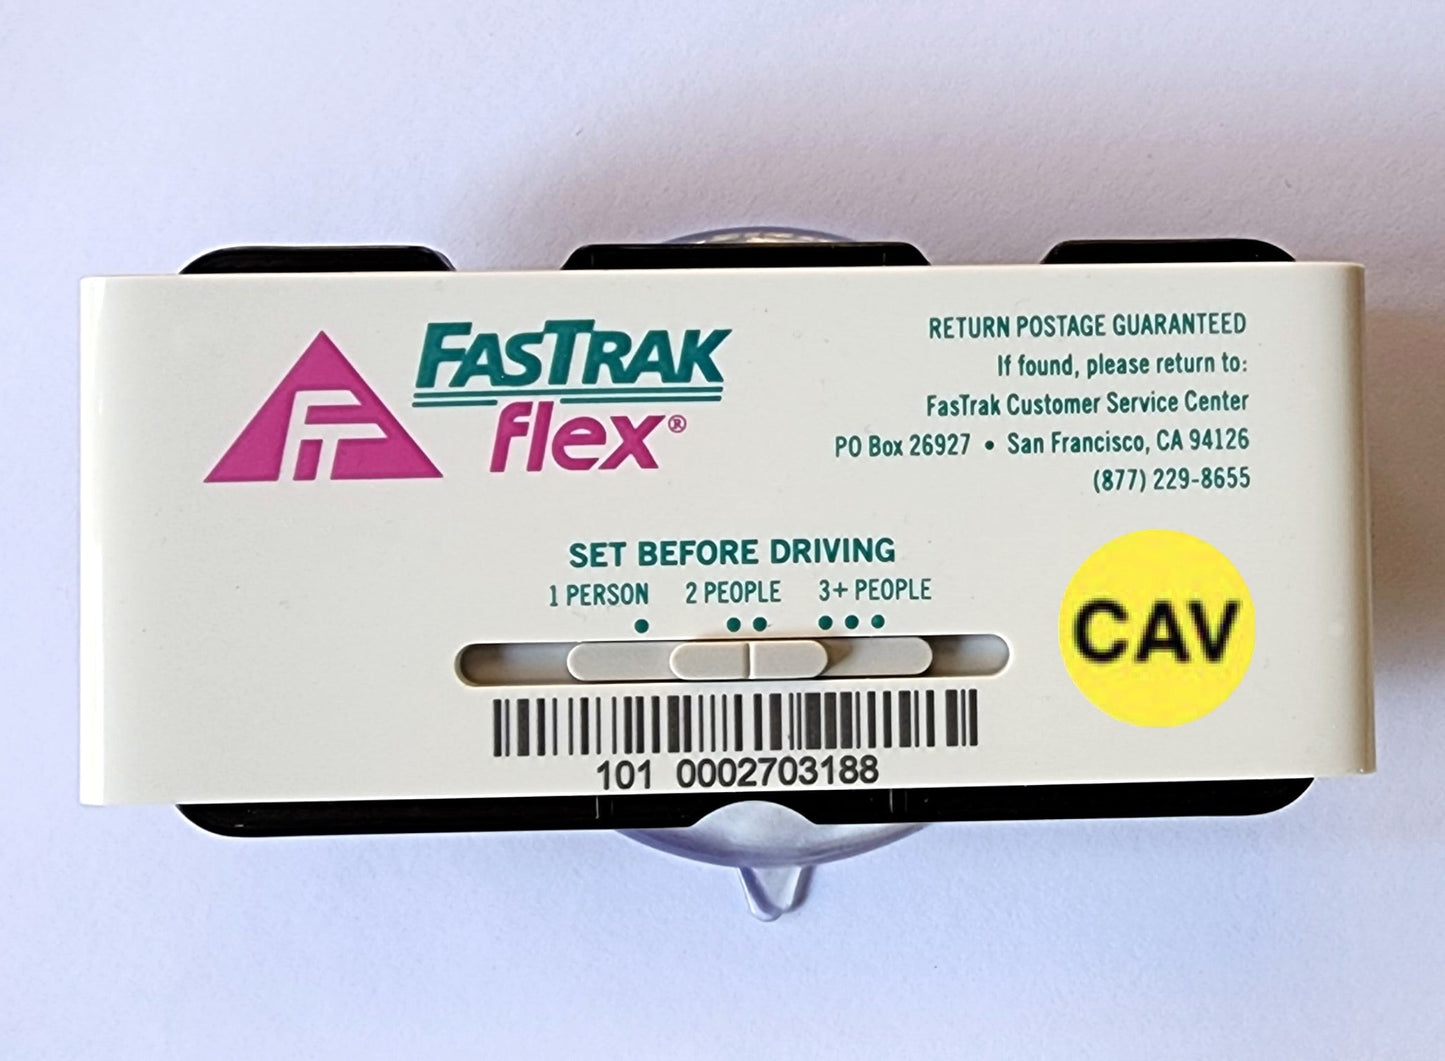 EZ Pass-Mate™ Black - Universal FasTrak Toll Pass Holder by JL Safety. Sturdy Toll Tag Holder for ALL FasTrak models including FasTrak Flex CAV and FasTrak Standard / Switchable. Comes with 3 Suction Cup Sizes and 2 Extra Strips. Made in USA